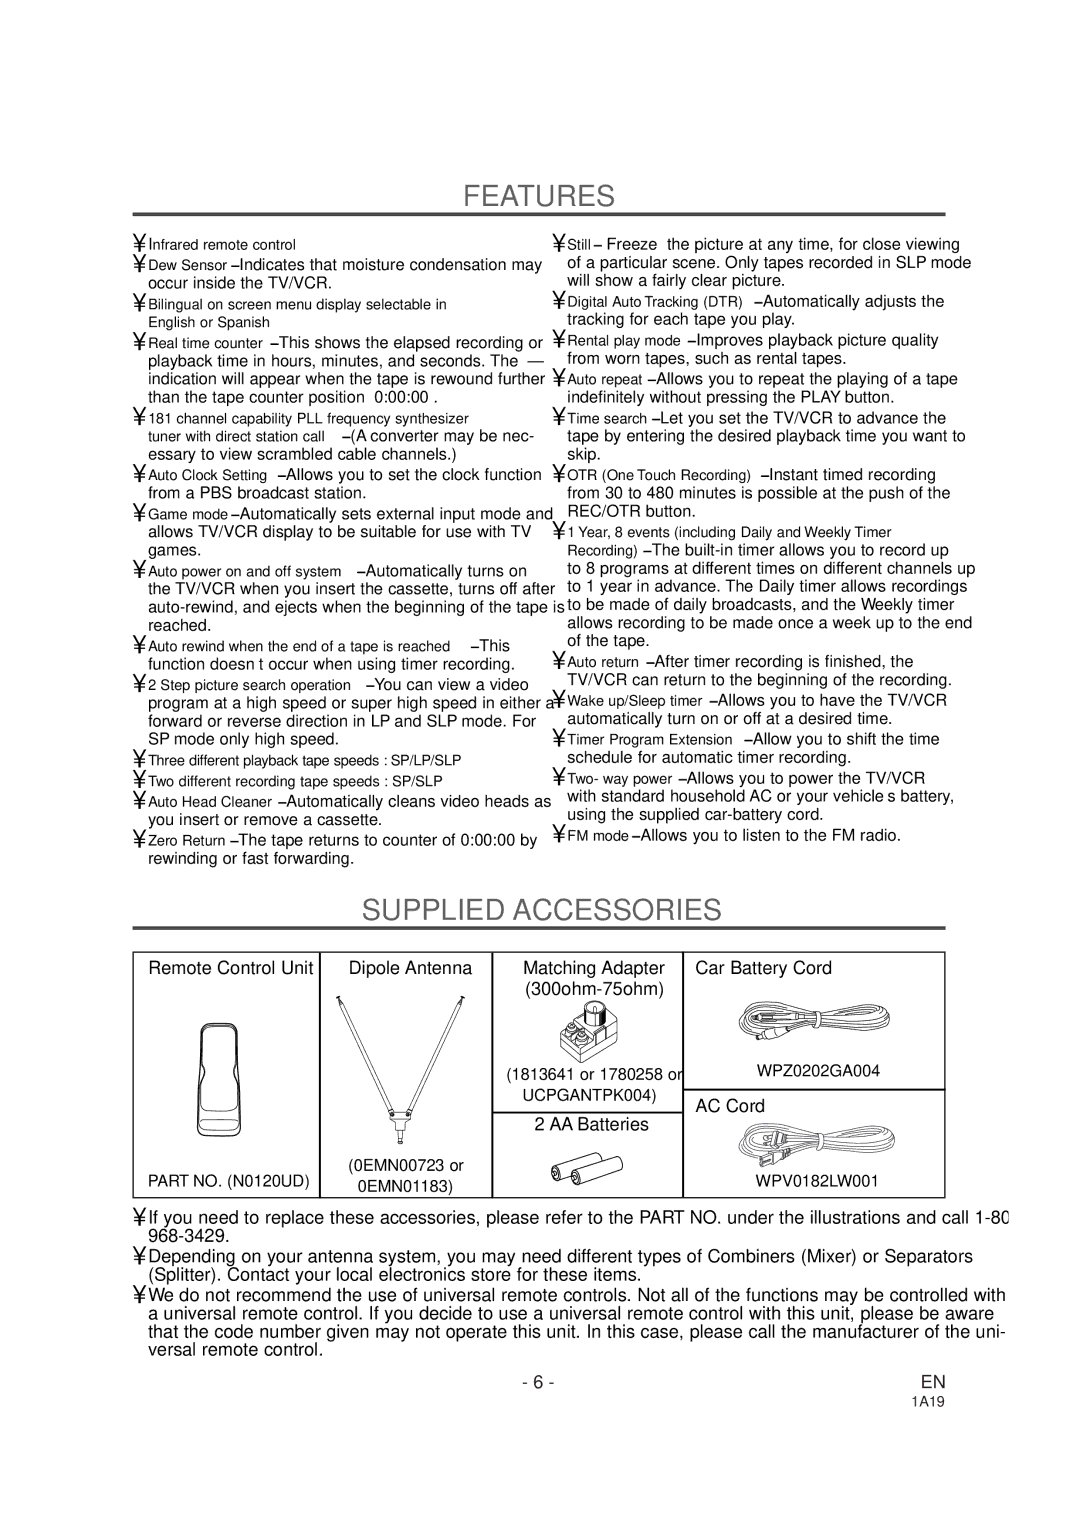 Sylvania SSC091 owner manual Features, Supplied Accessories 